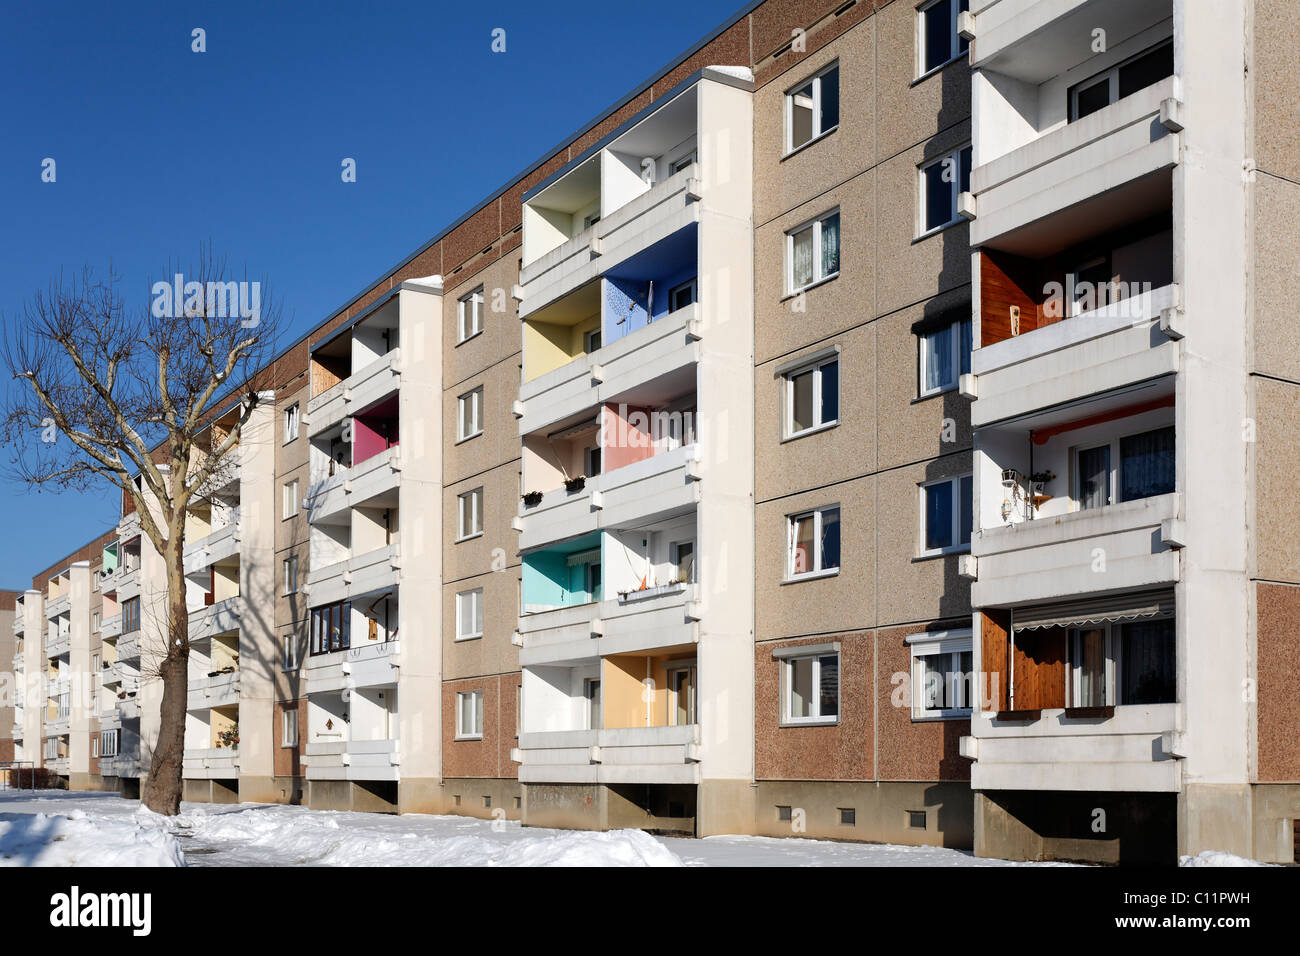 Pre-fabricated concrete building with brightly painted balconies, Thale, Harz, Saxony-Anhalt, Germany, Europe Stock Photo